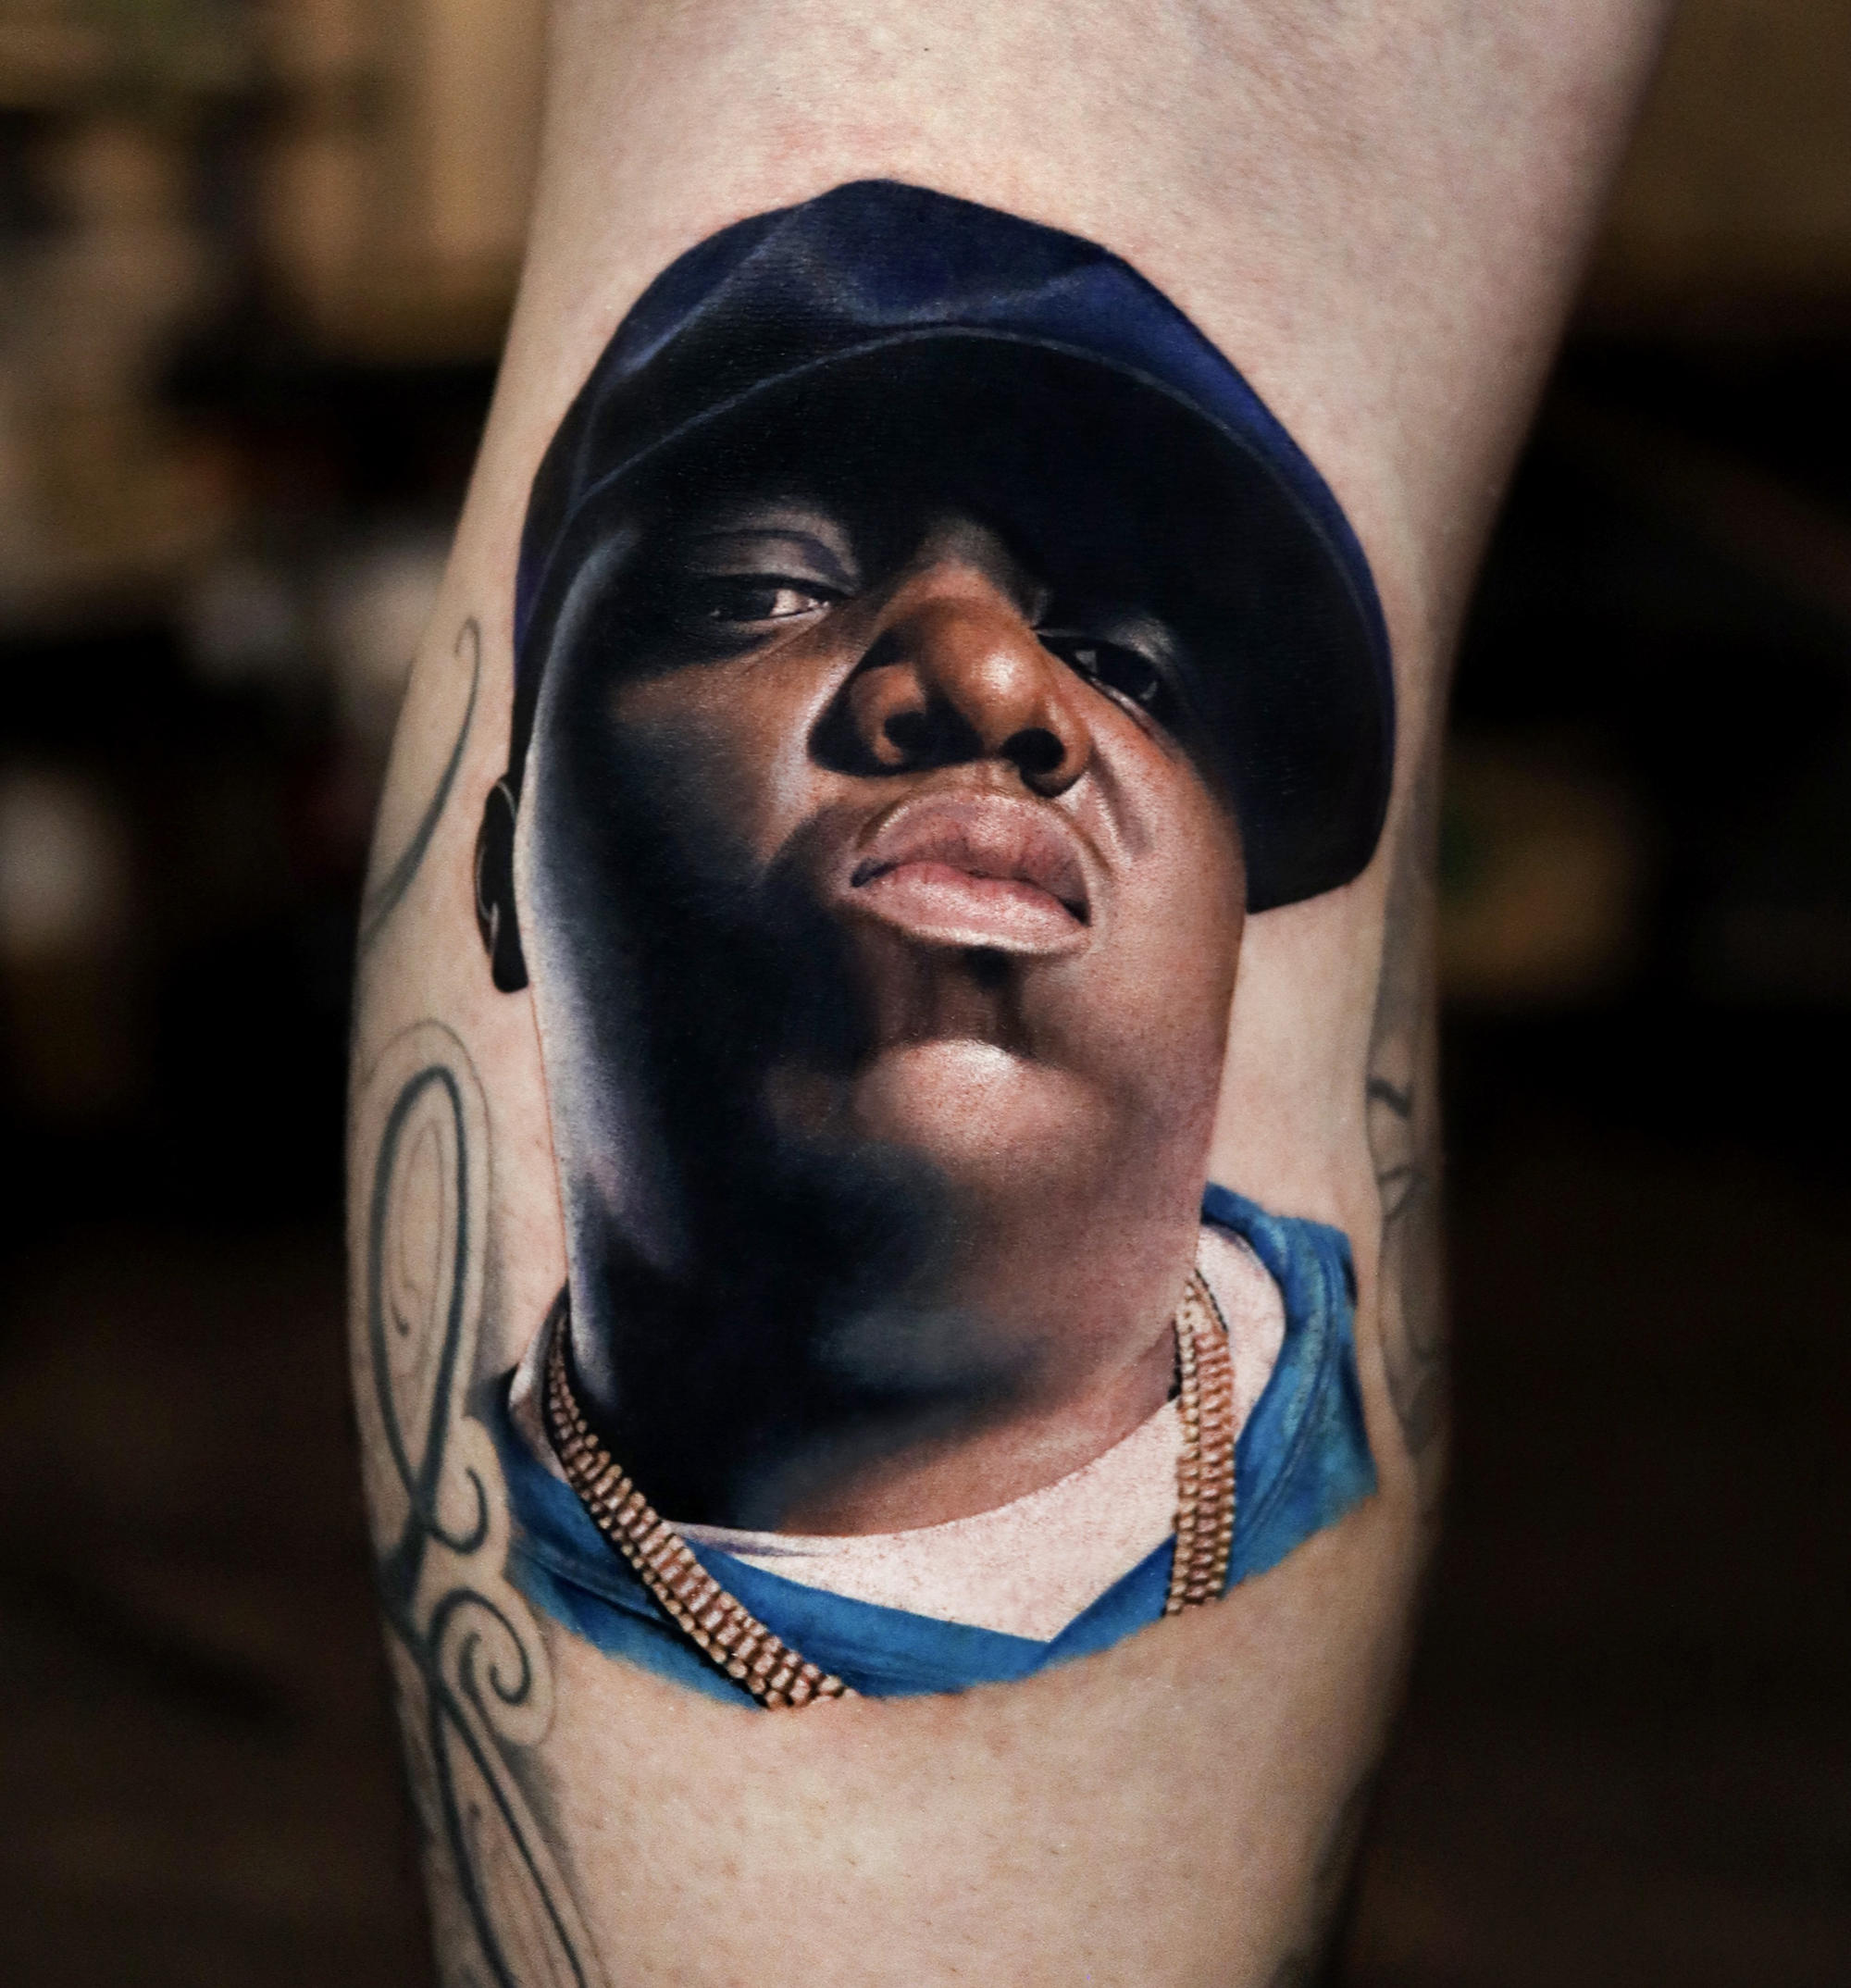 American rapper and songwriter The Notorious B.I.G